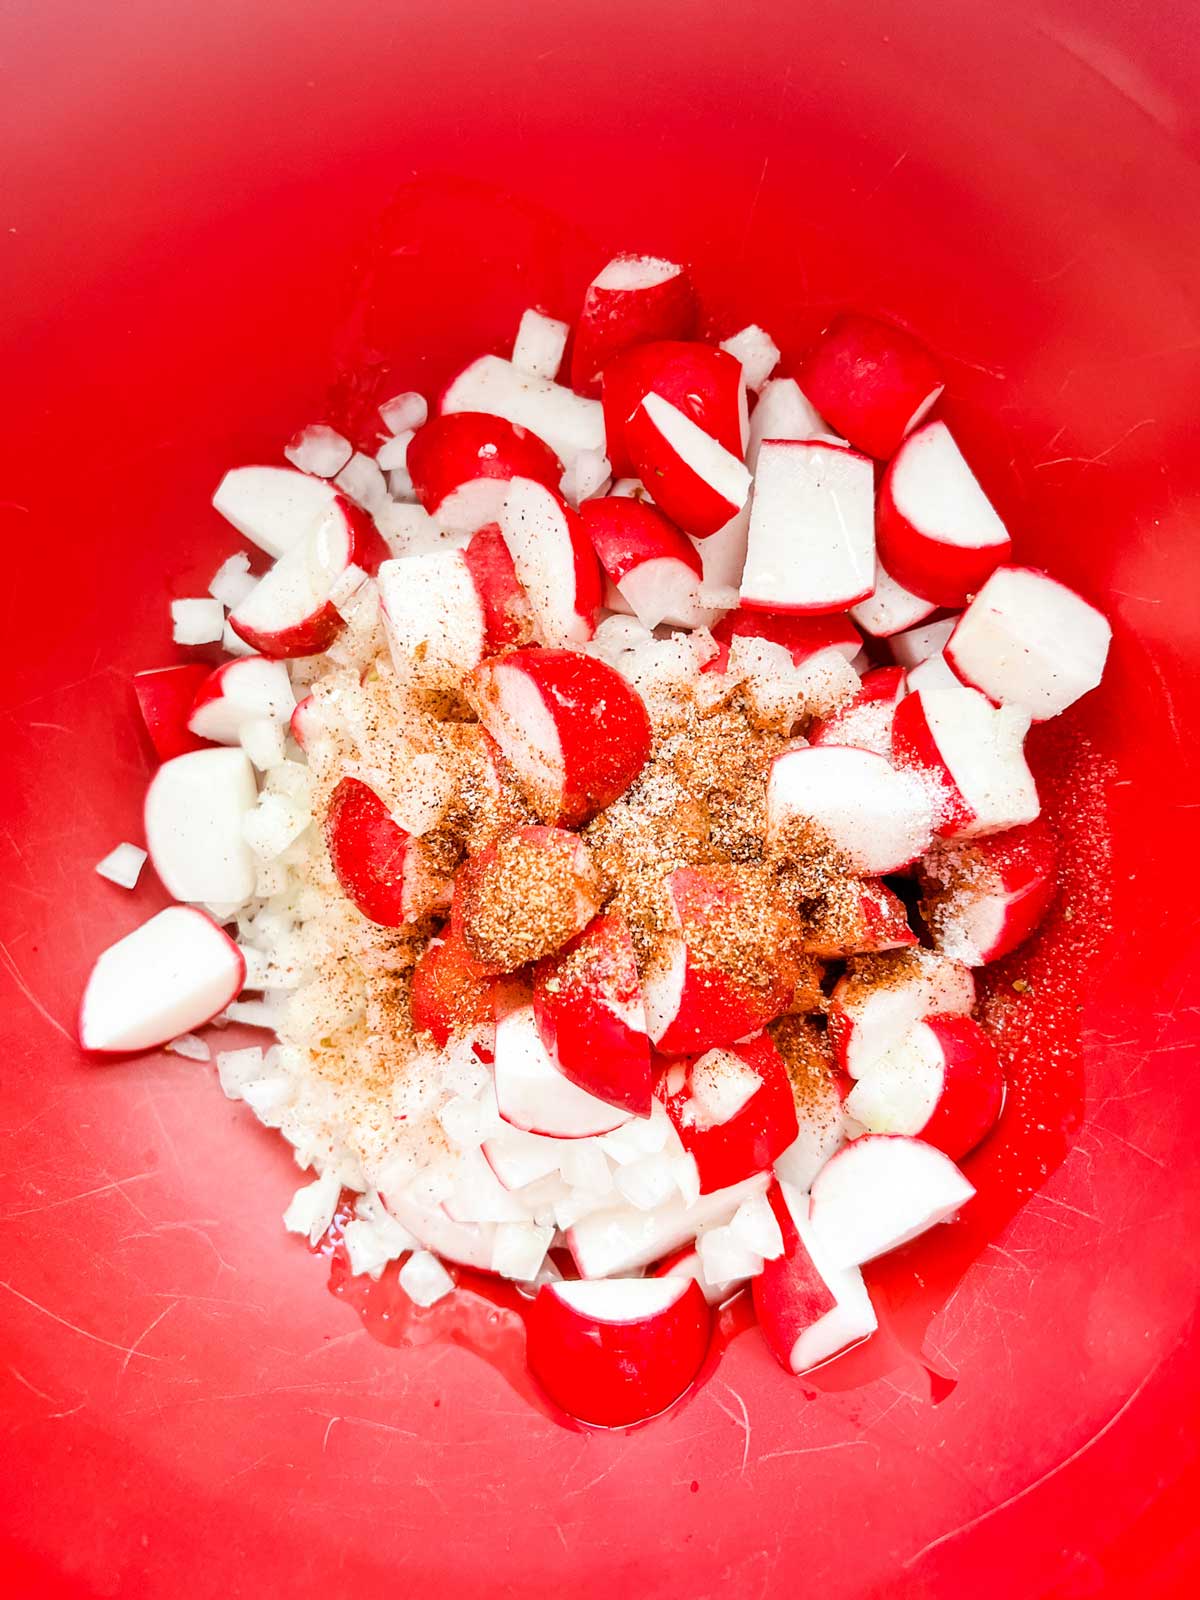 Photo of a red bowl with radish, onion, and seasonings.